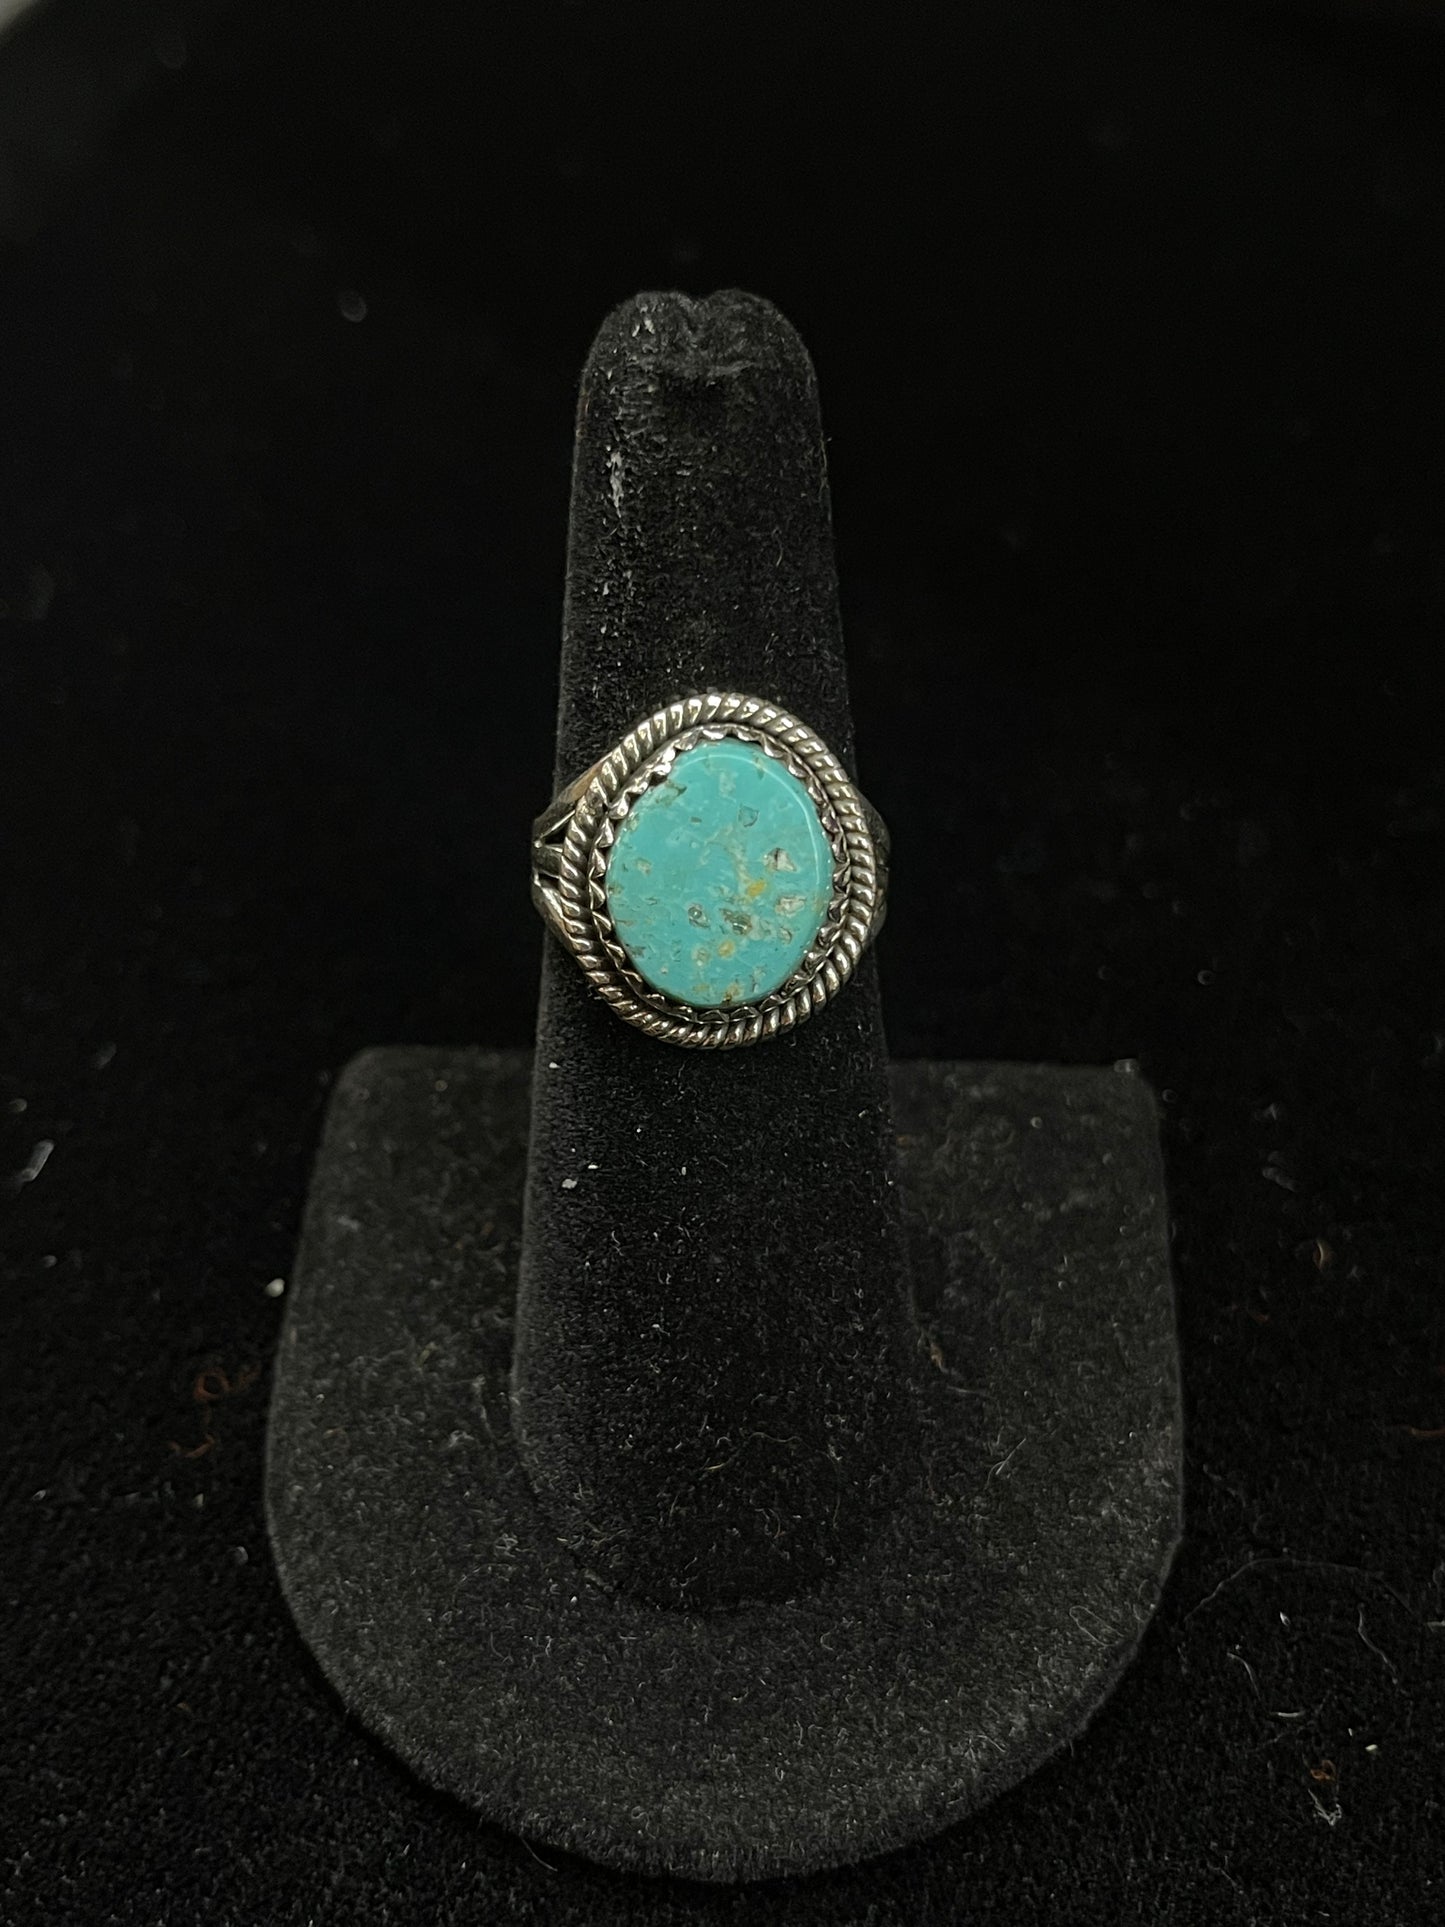 7.0 Turquoise Ring by Running Bear